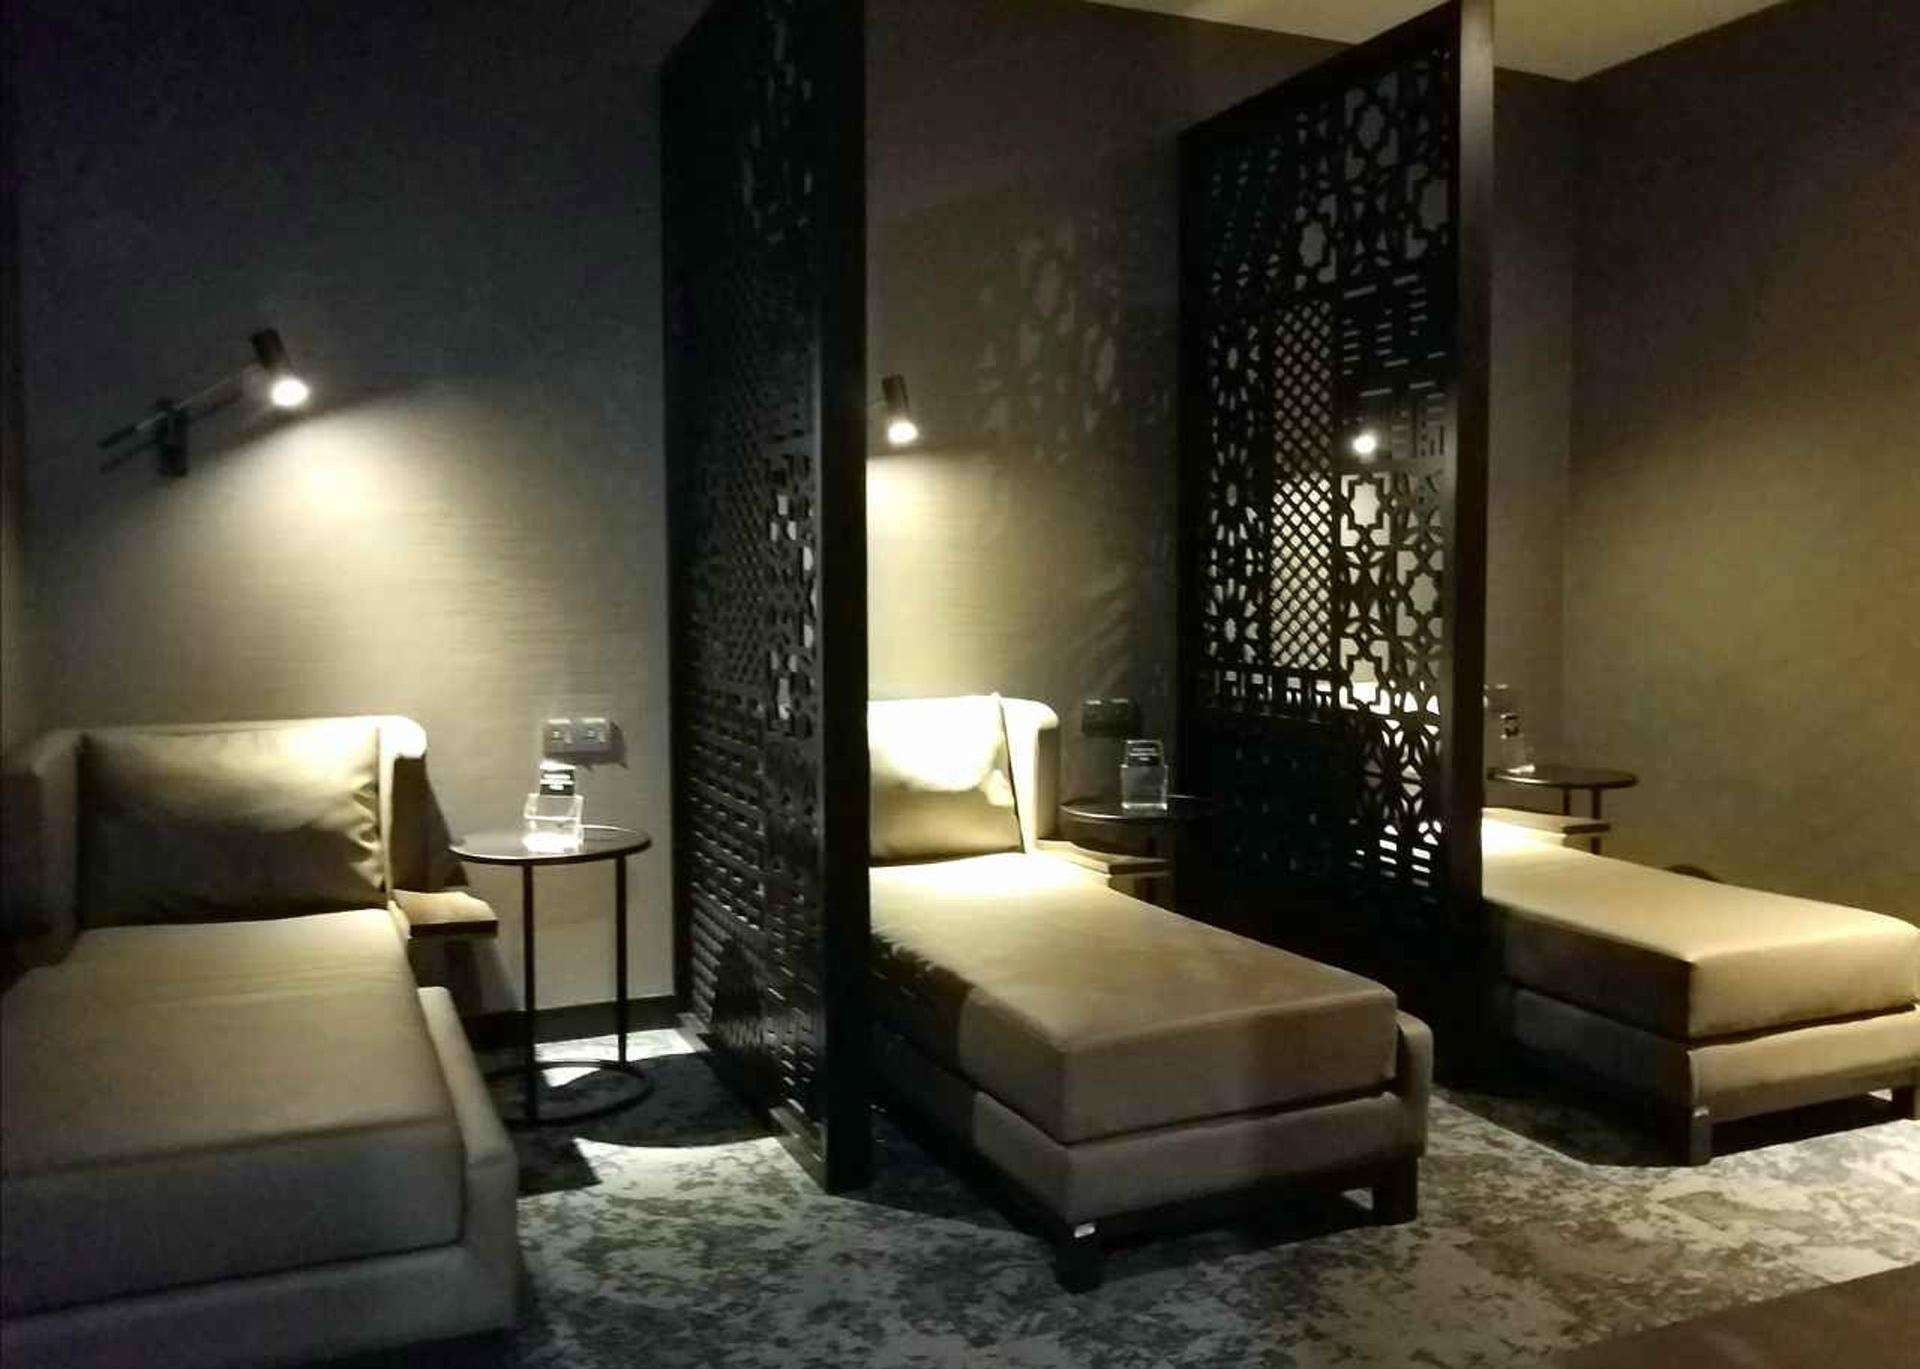 Malaysia Airlines Platinum Lounge image 4 of 26